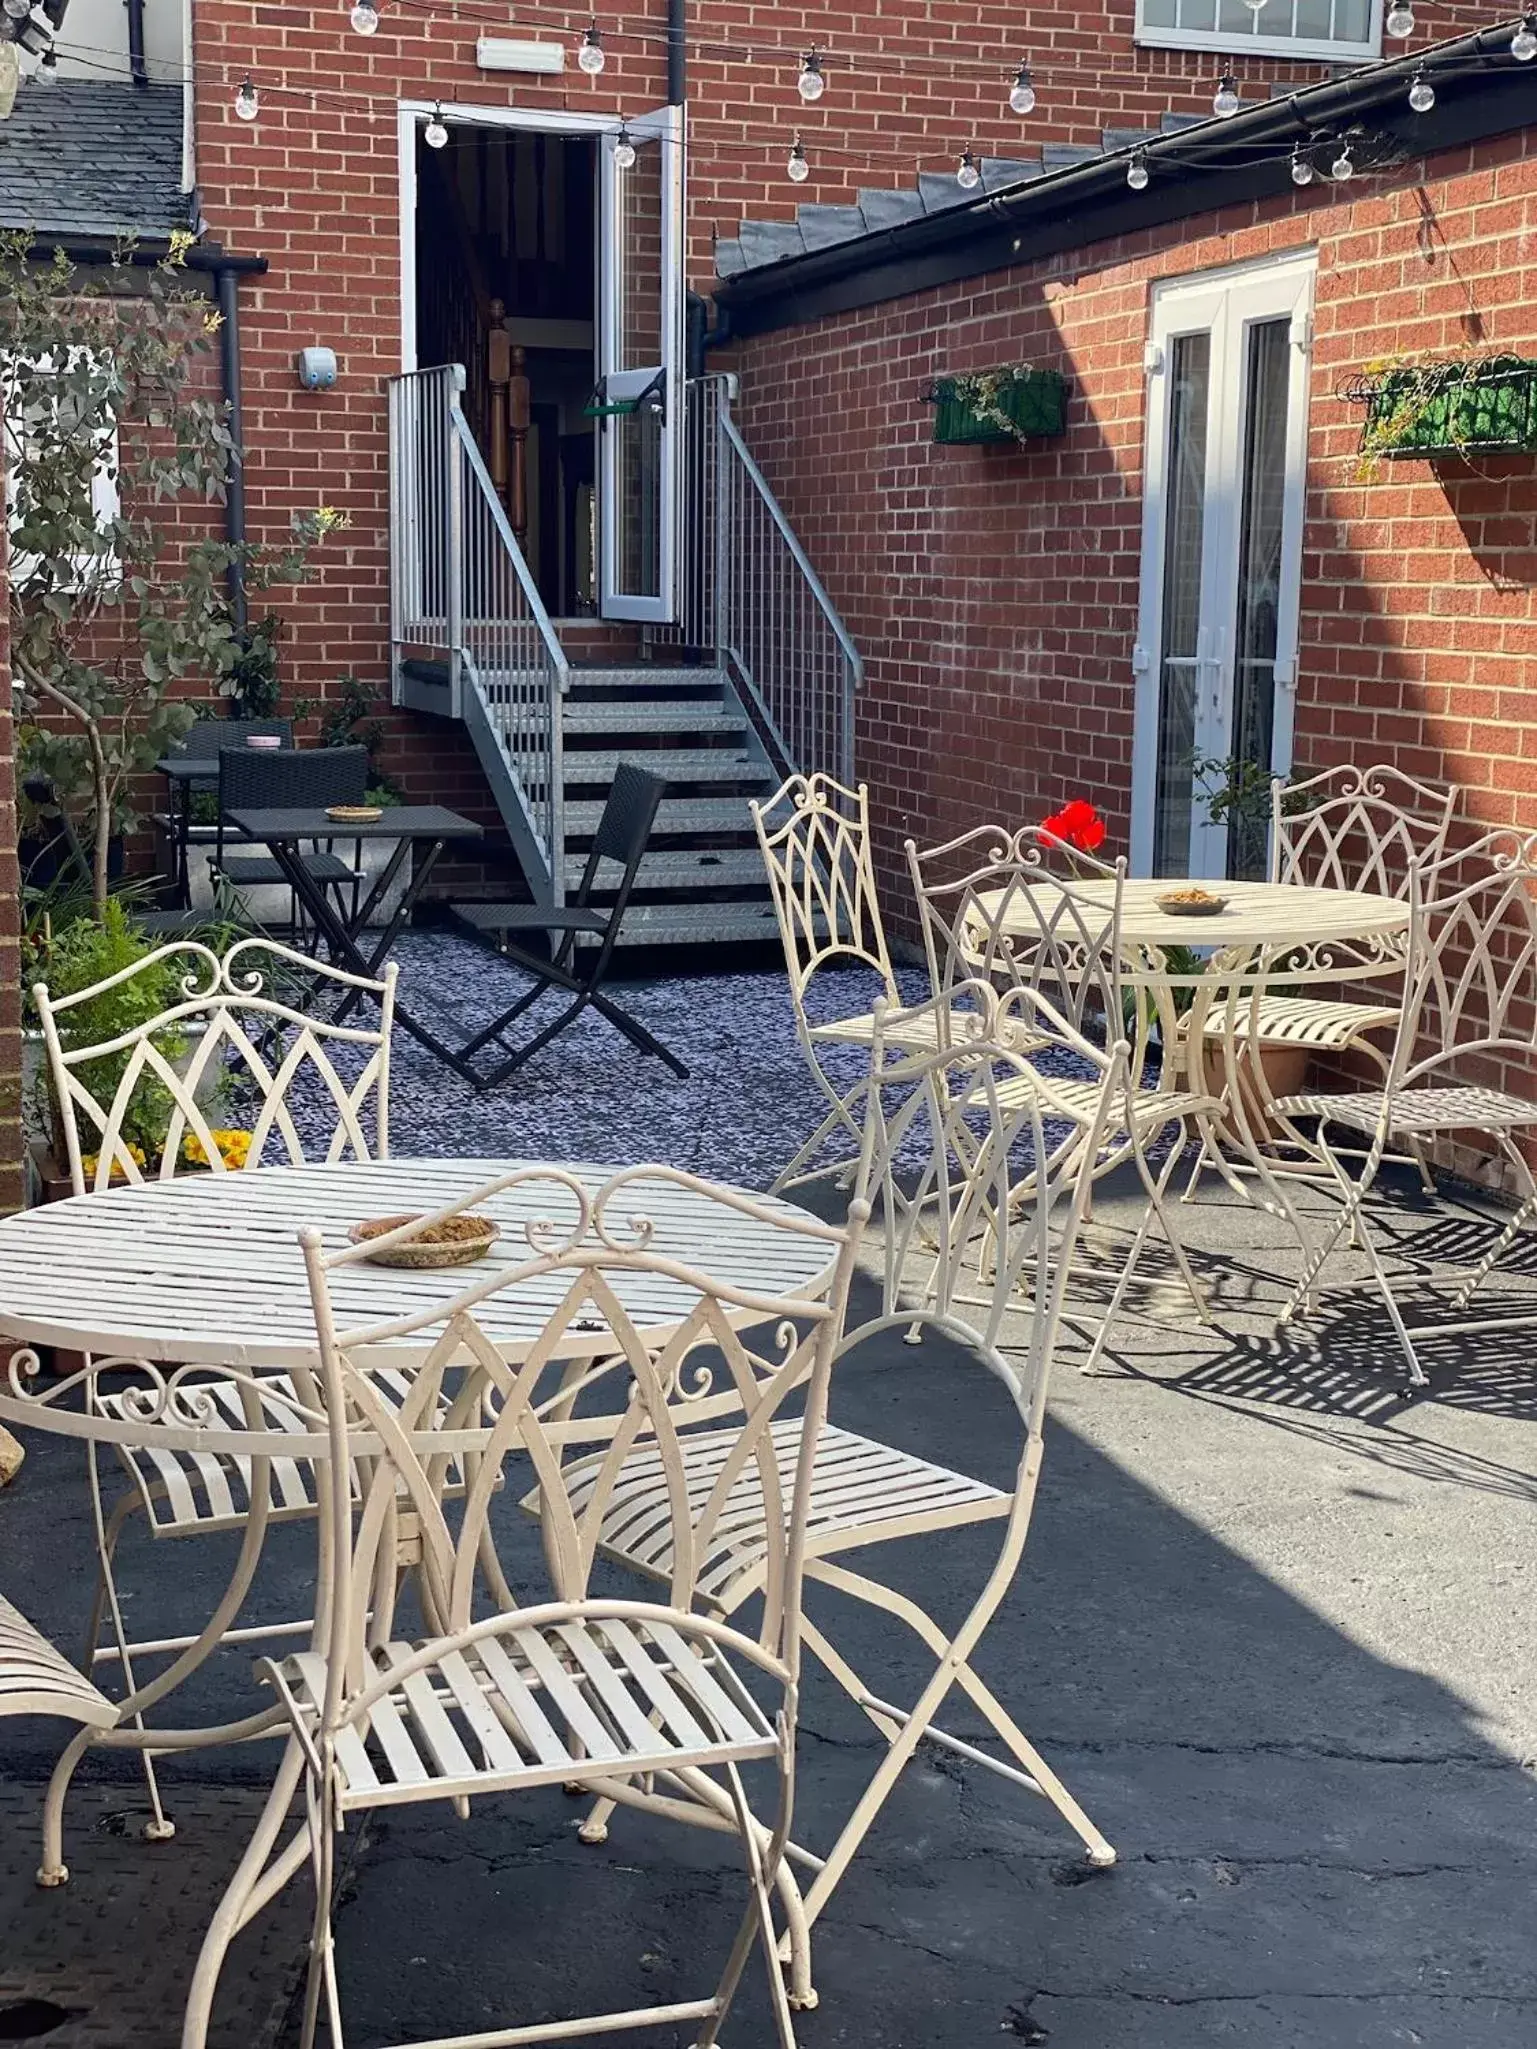 Patio, Patio/Outdoor Area in The Ilchester Arms Hotel, Ilchester Somerset